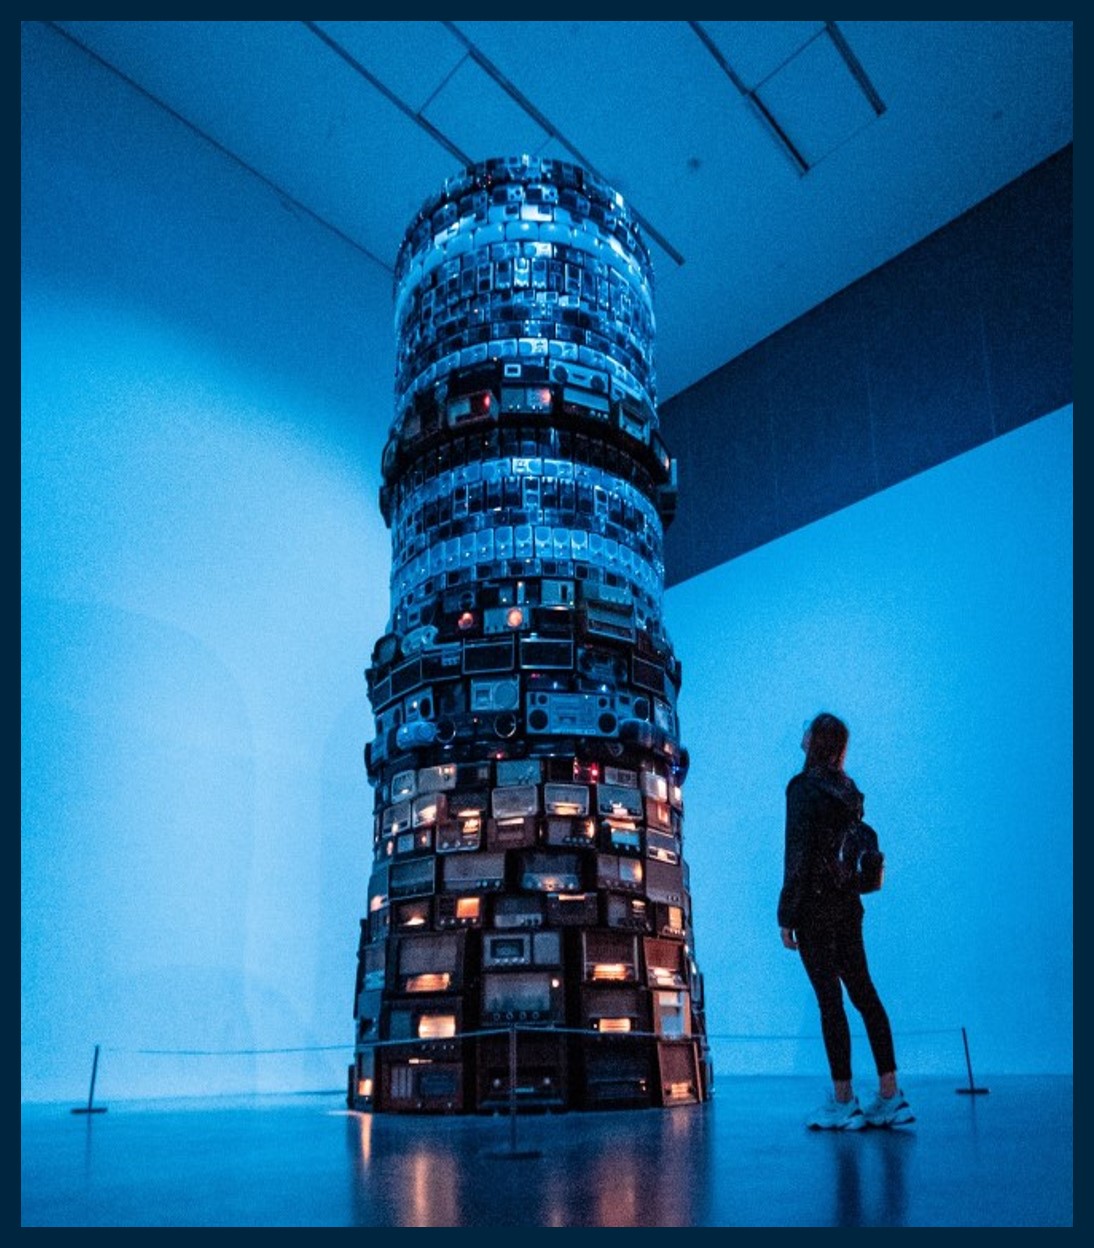 A column built of different electronic devices such as radios and televisions. A woman is looking up at the column.